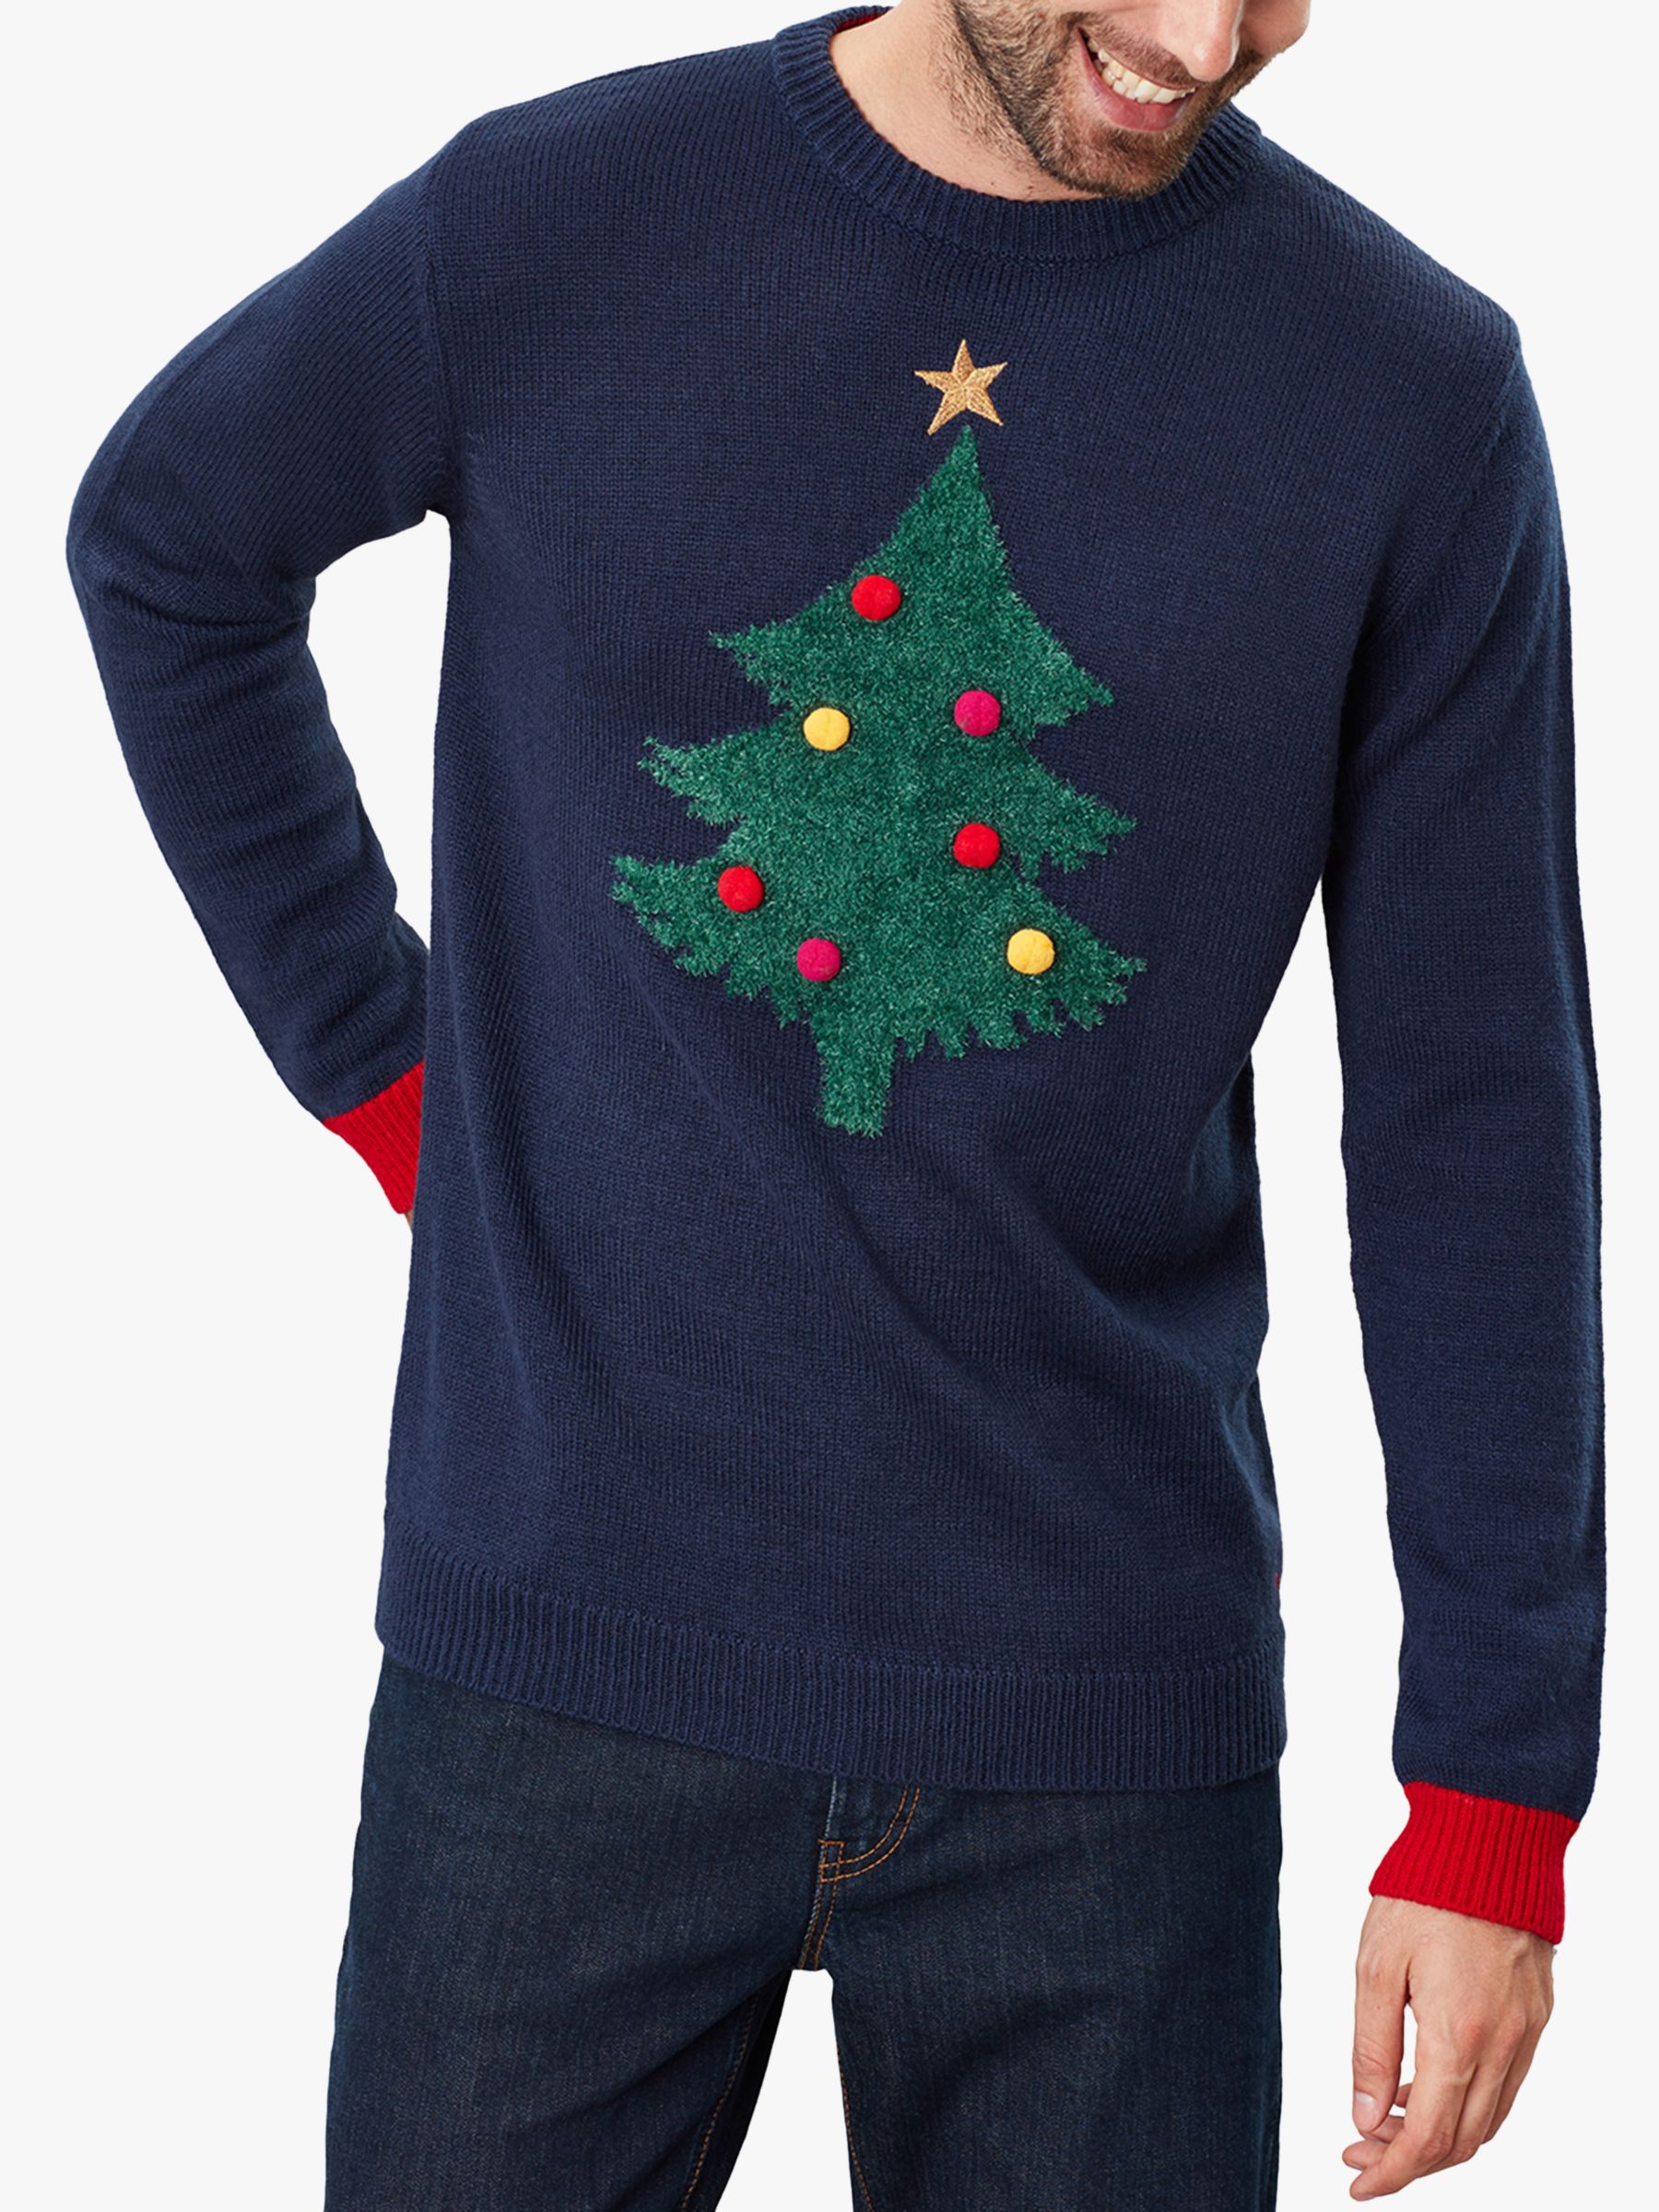 Joules Cracking Christmas Tree Jumper, Navy